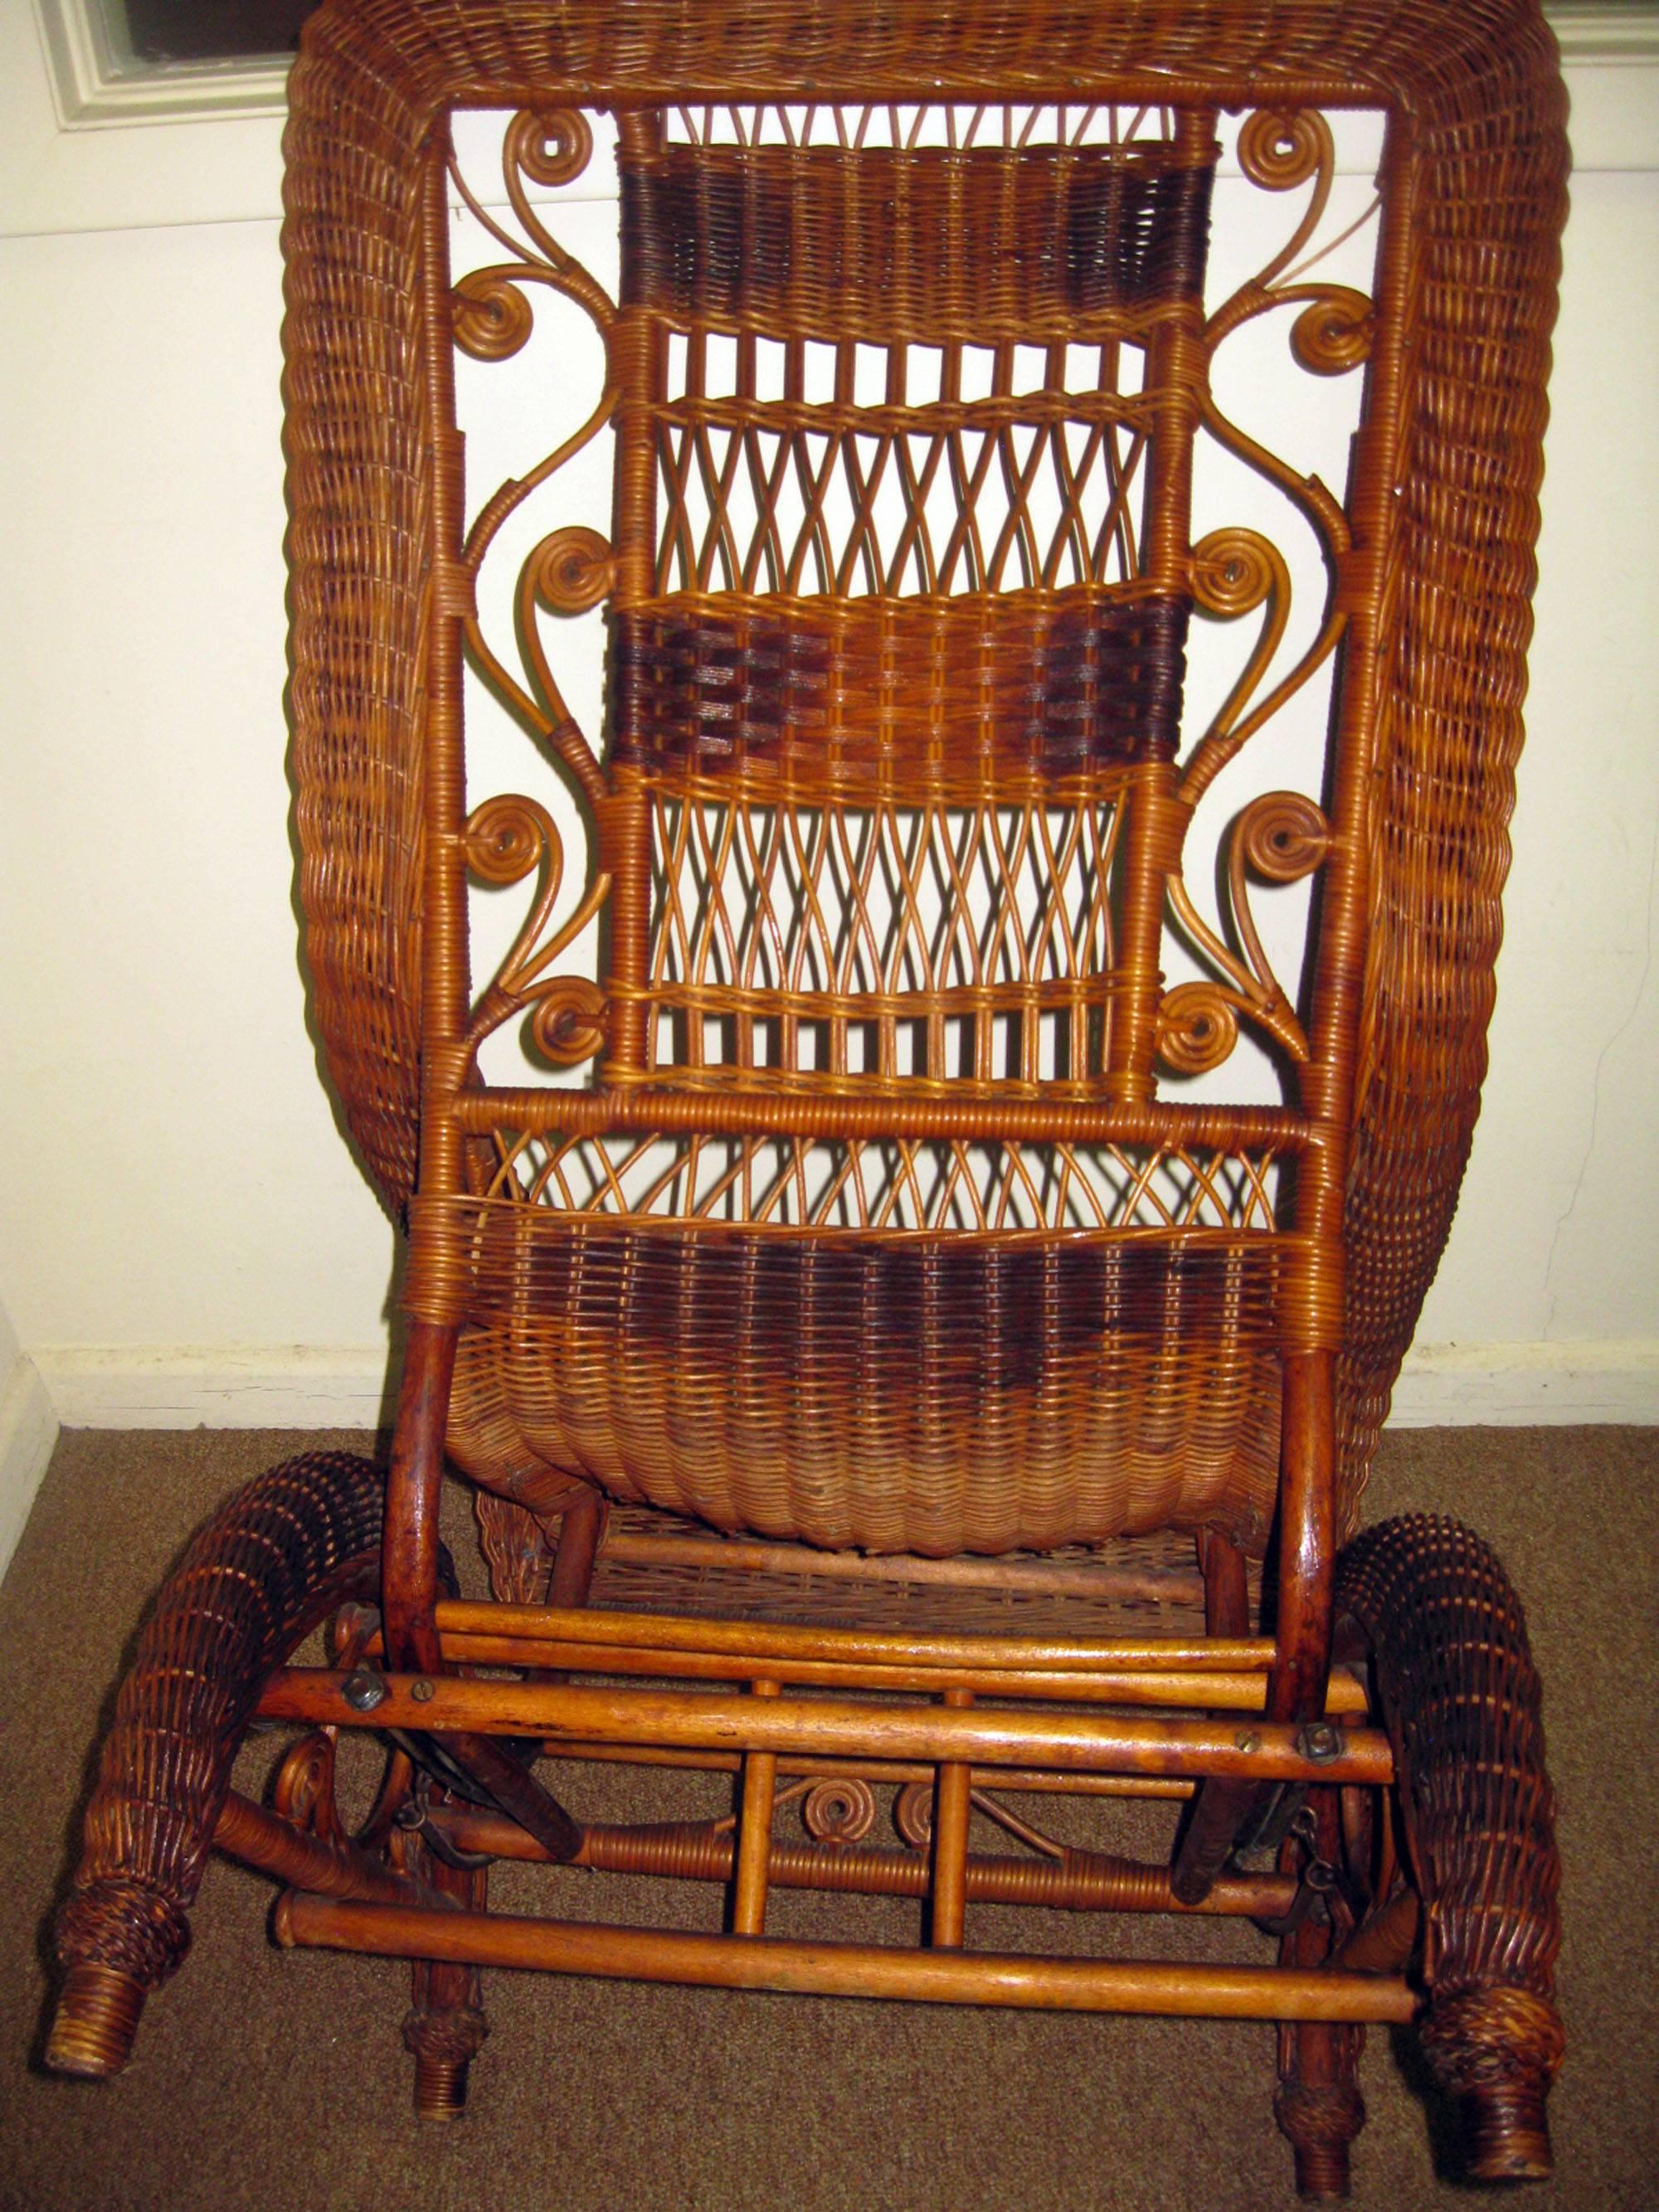 Unlabelled but this somewhat bulky design is often associated with Heywood Bros. & Wakefield Company shortly after their merger in 1897. Unique staining with shadow effect was also a hallmark of this newly formed firm. Pieces attributed to this